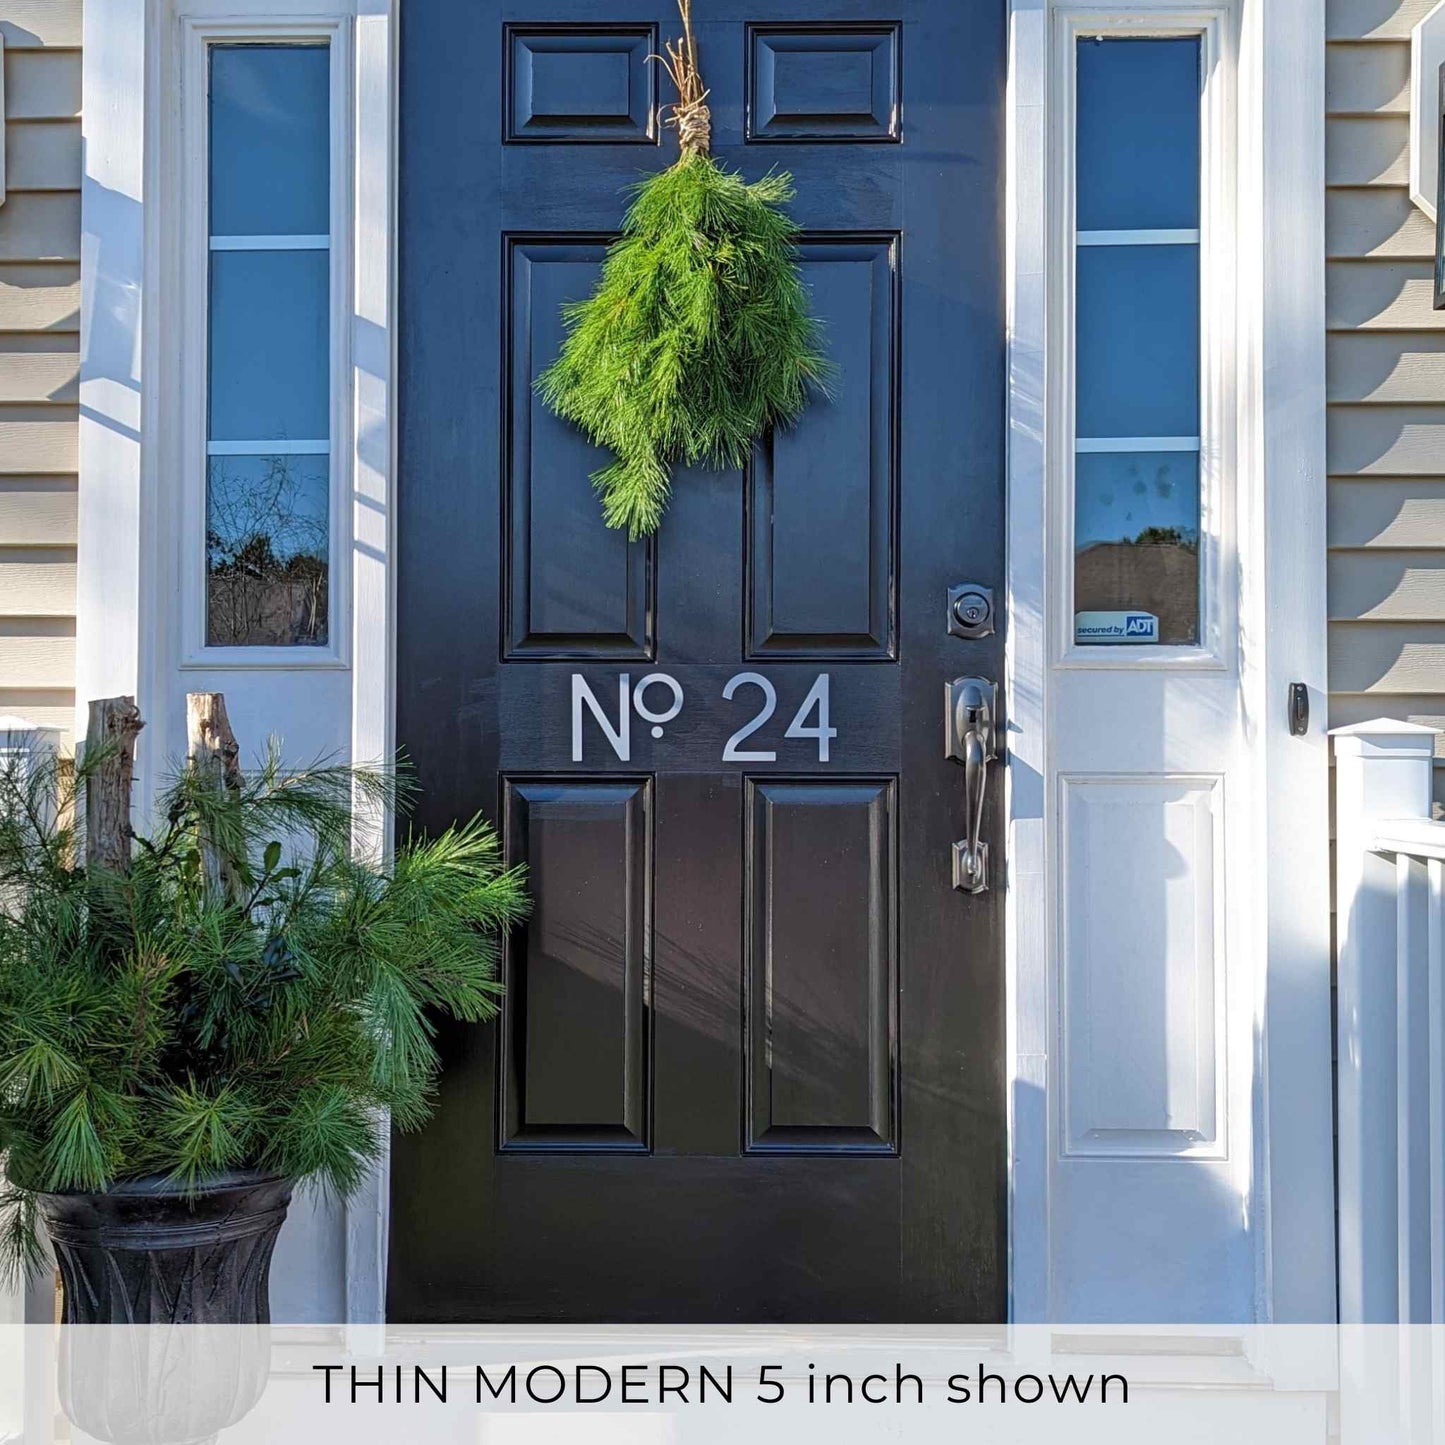 THIN MODERN white house numbers and letters on a black door